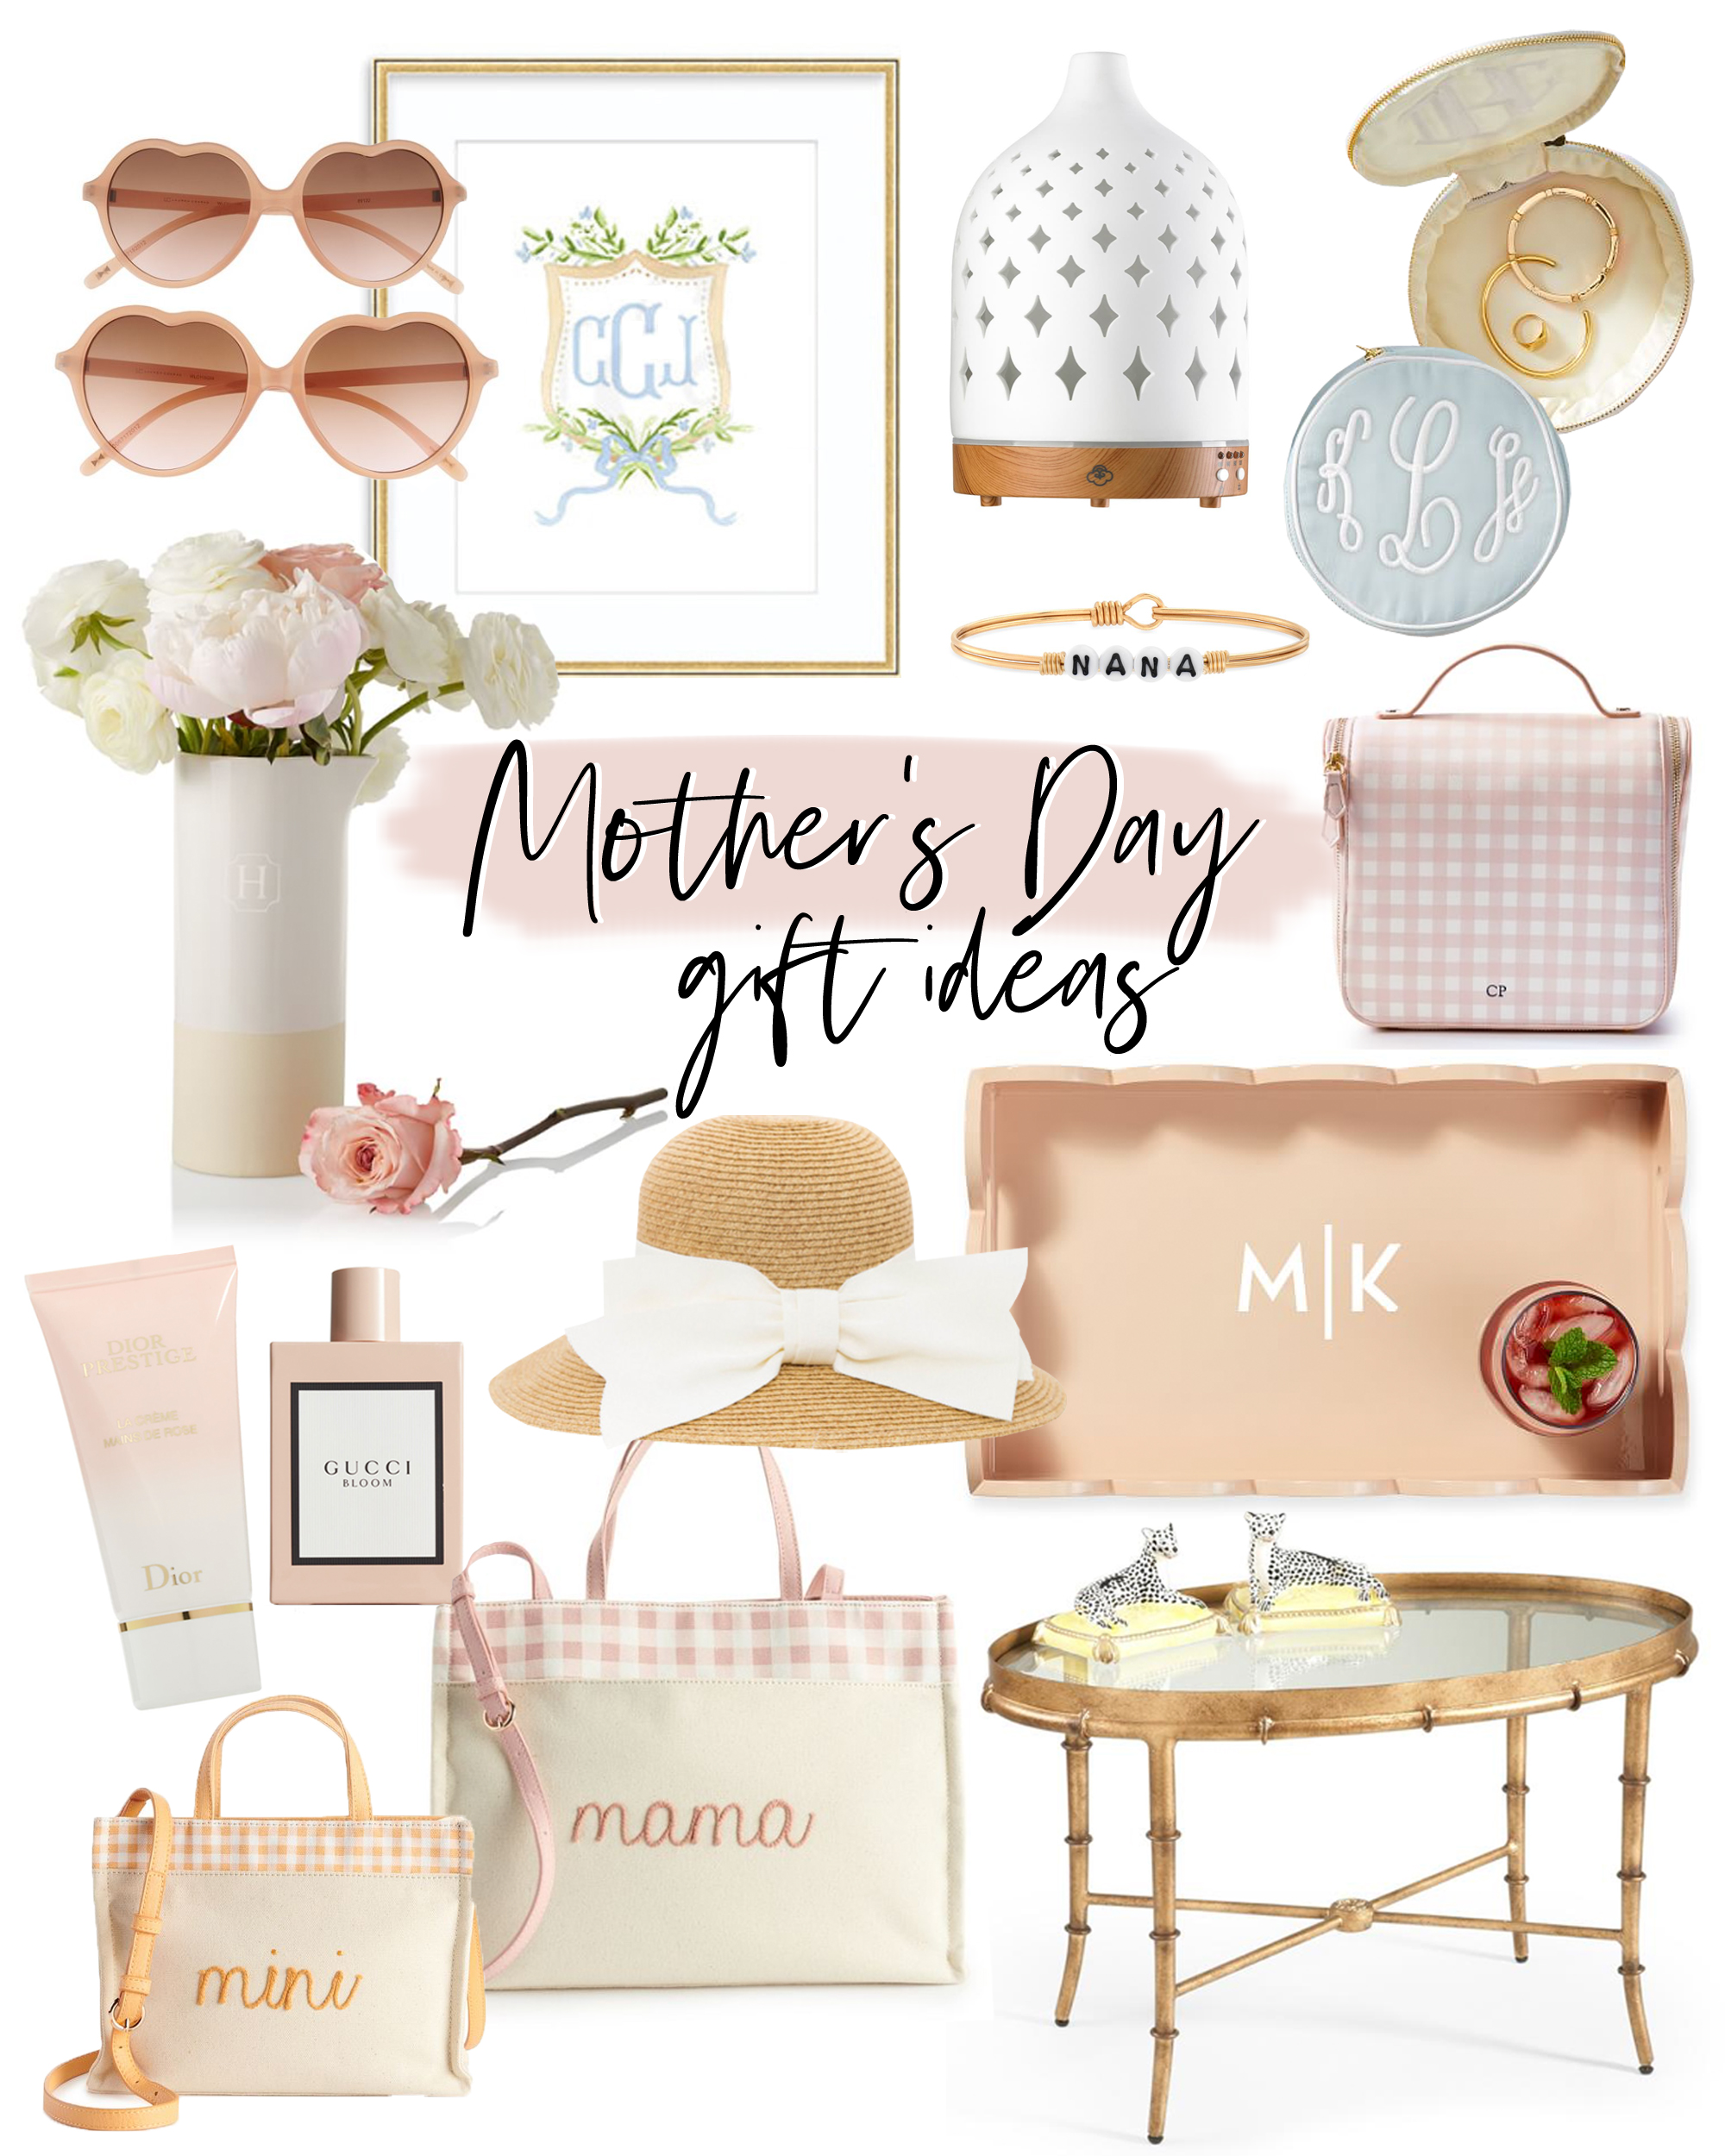 Mother's Day Gift Guide - Southern Curls & Pearls